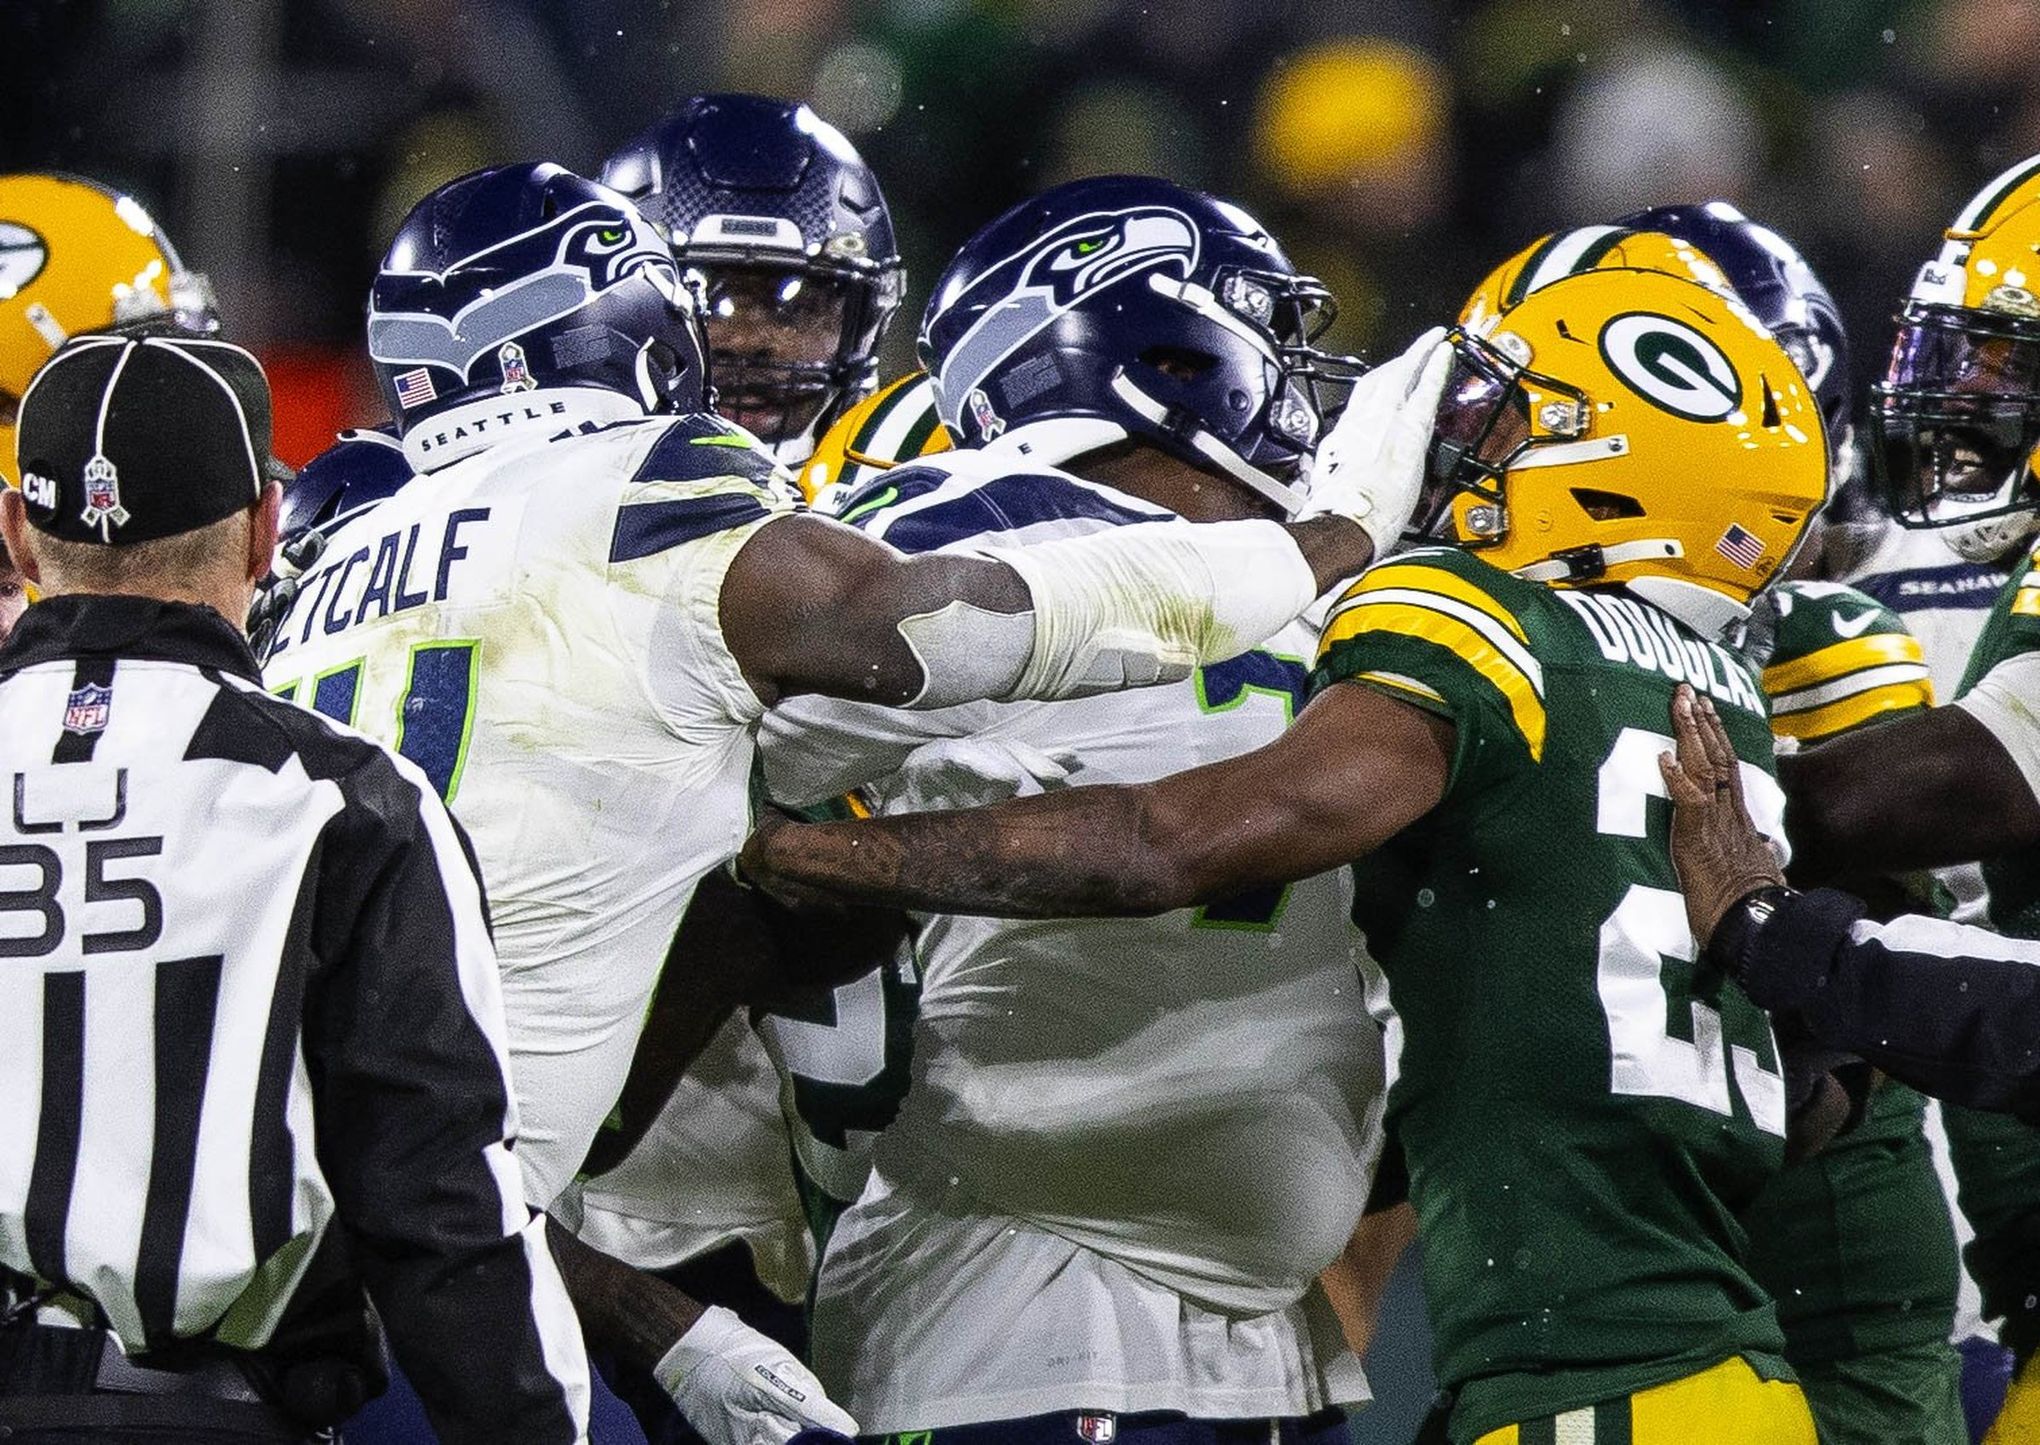 DK Metcalf ejections: Seahawks WR ejected in Packers game, then